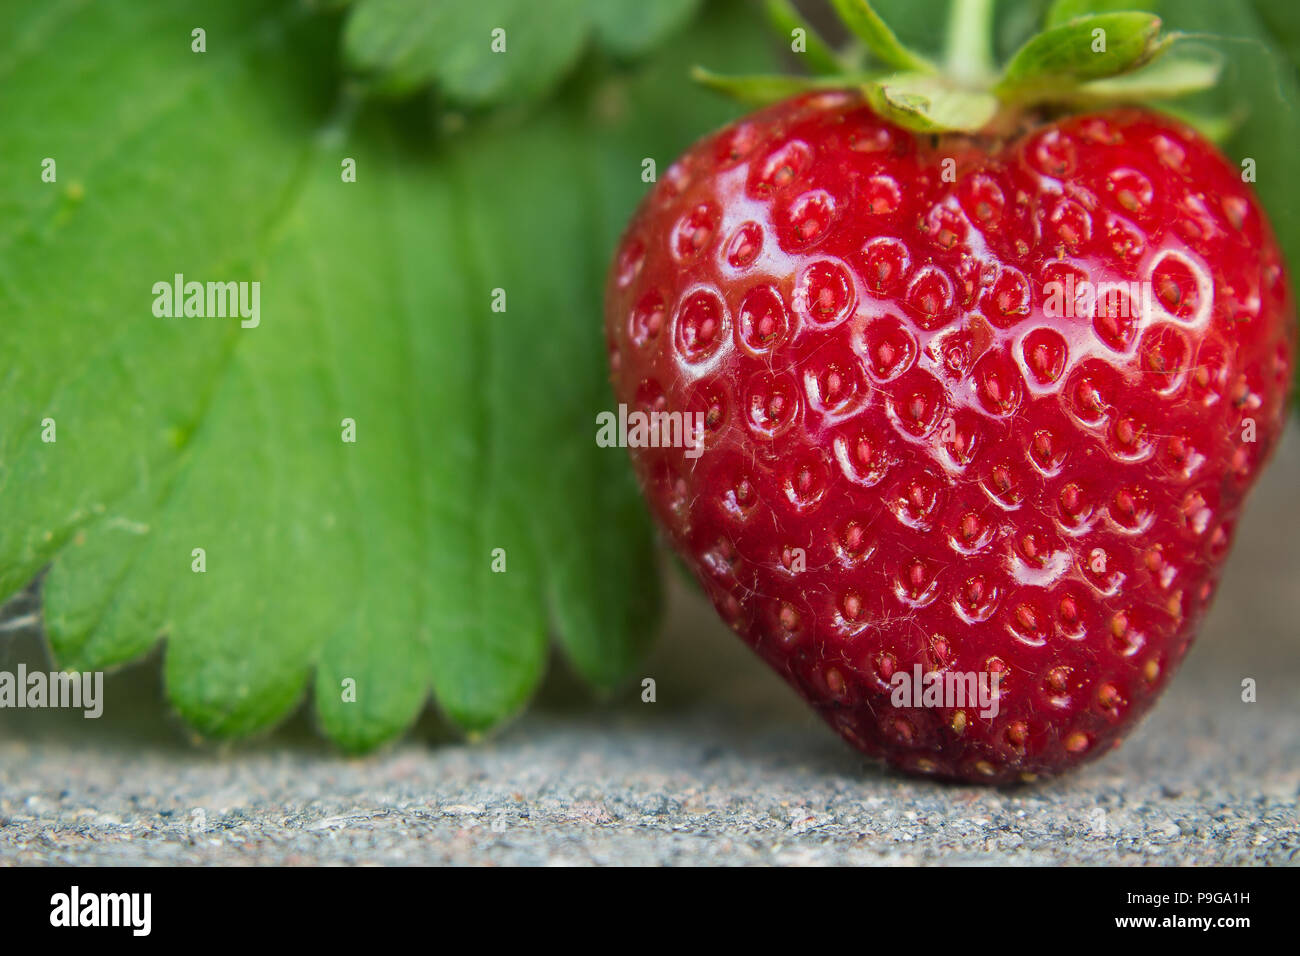 Heart shaped, homegrown strawberry on the vine Stock Photo